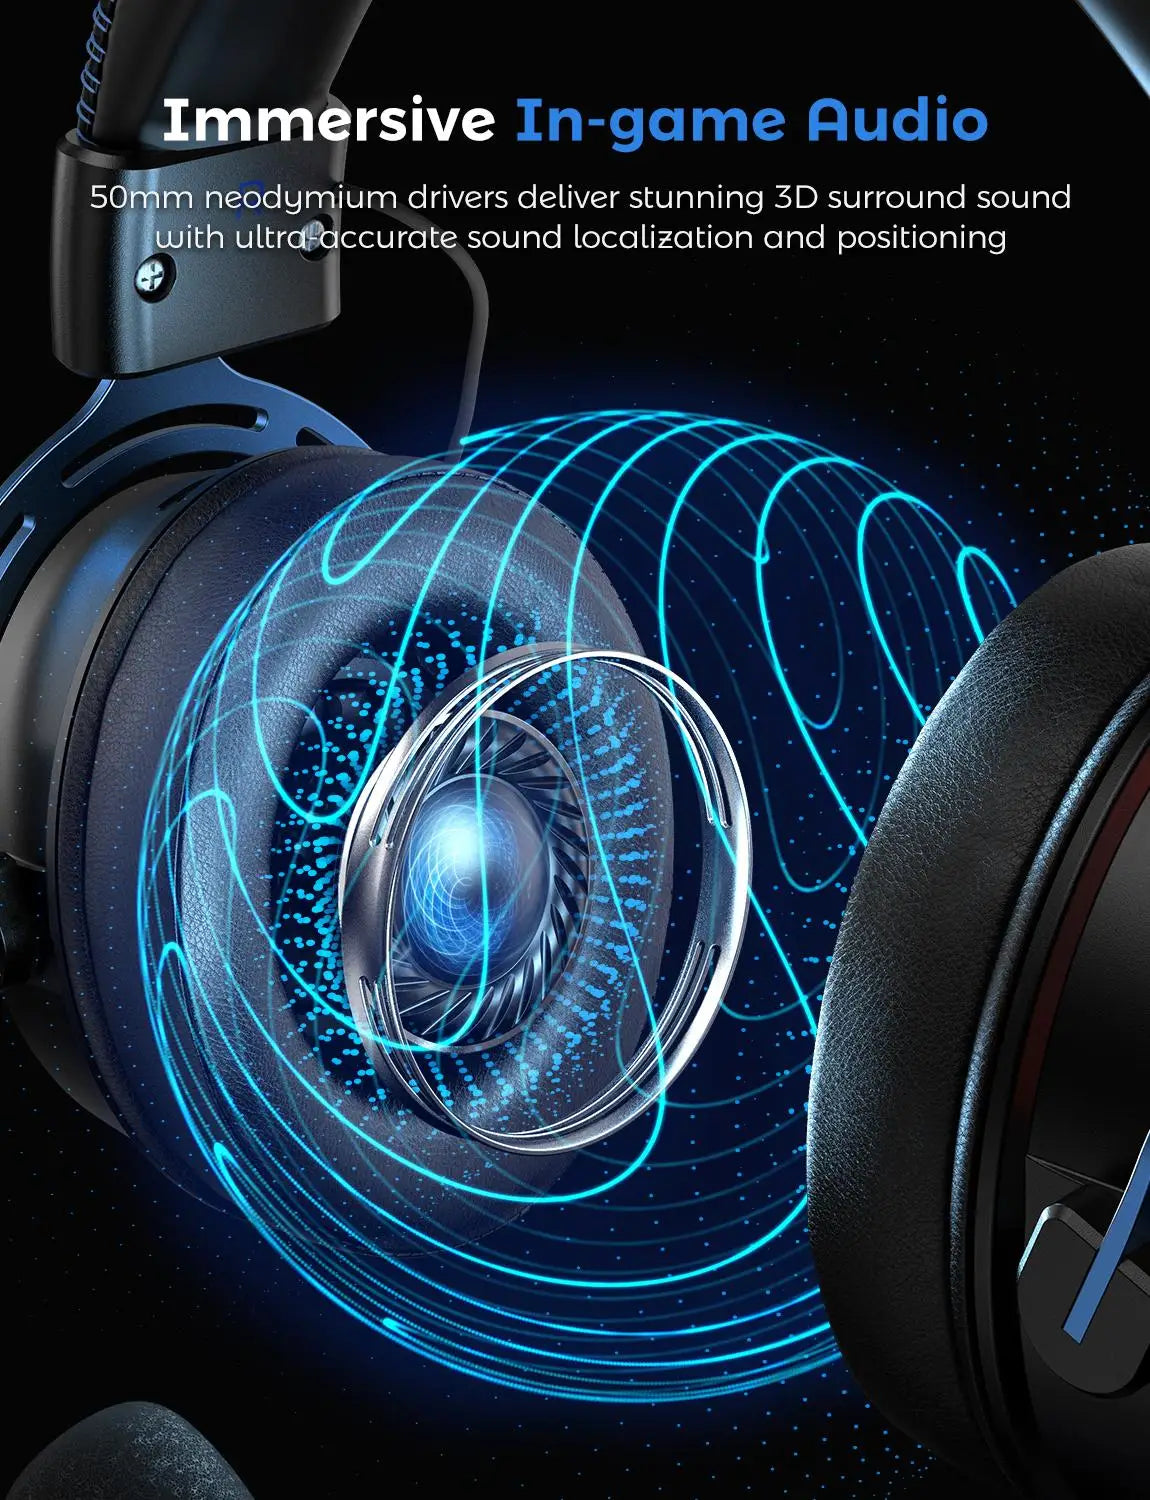 Gaming Wired Headset, 3D Sound, Noise Canceling Mic for PS4